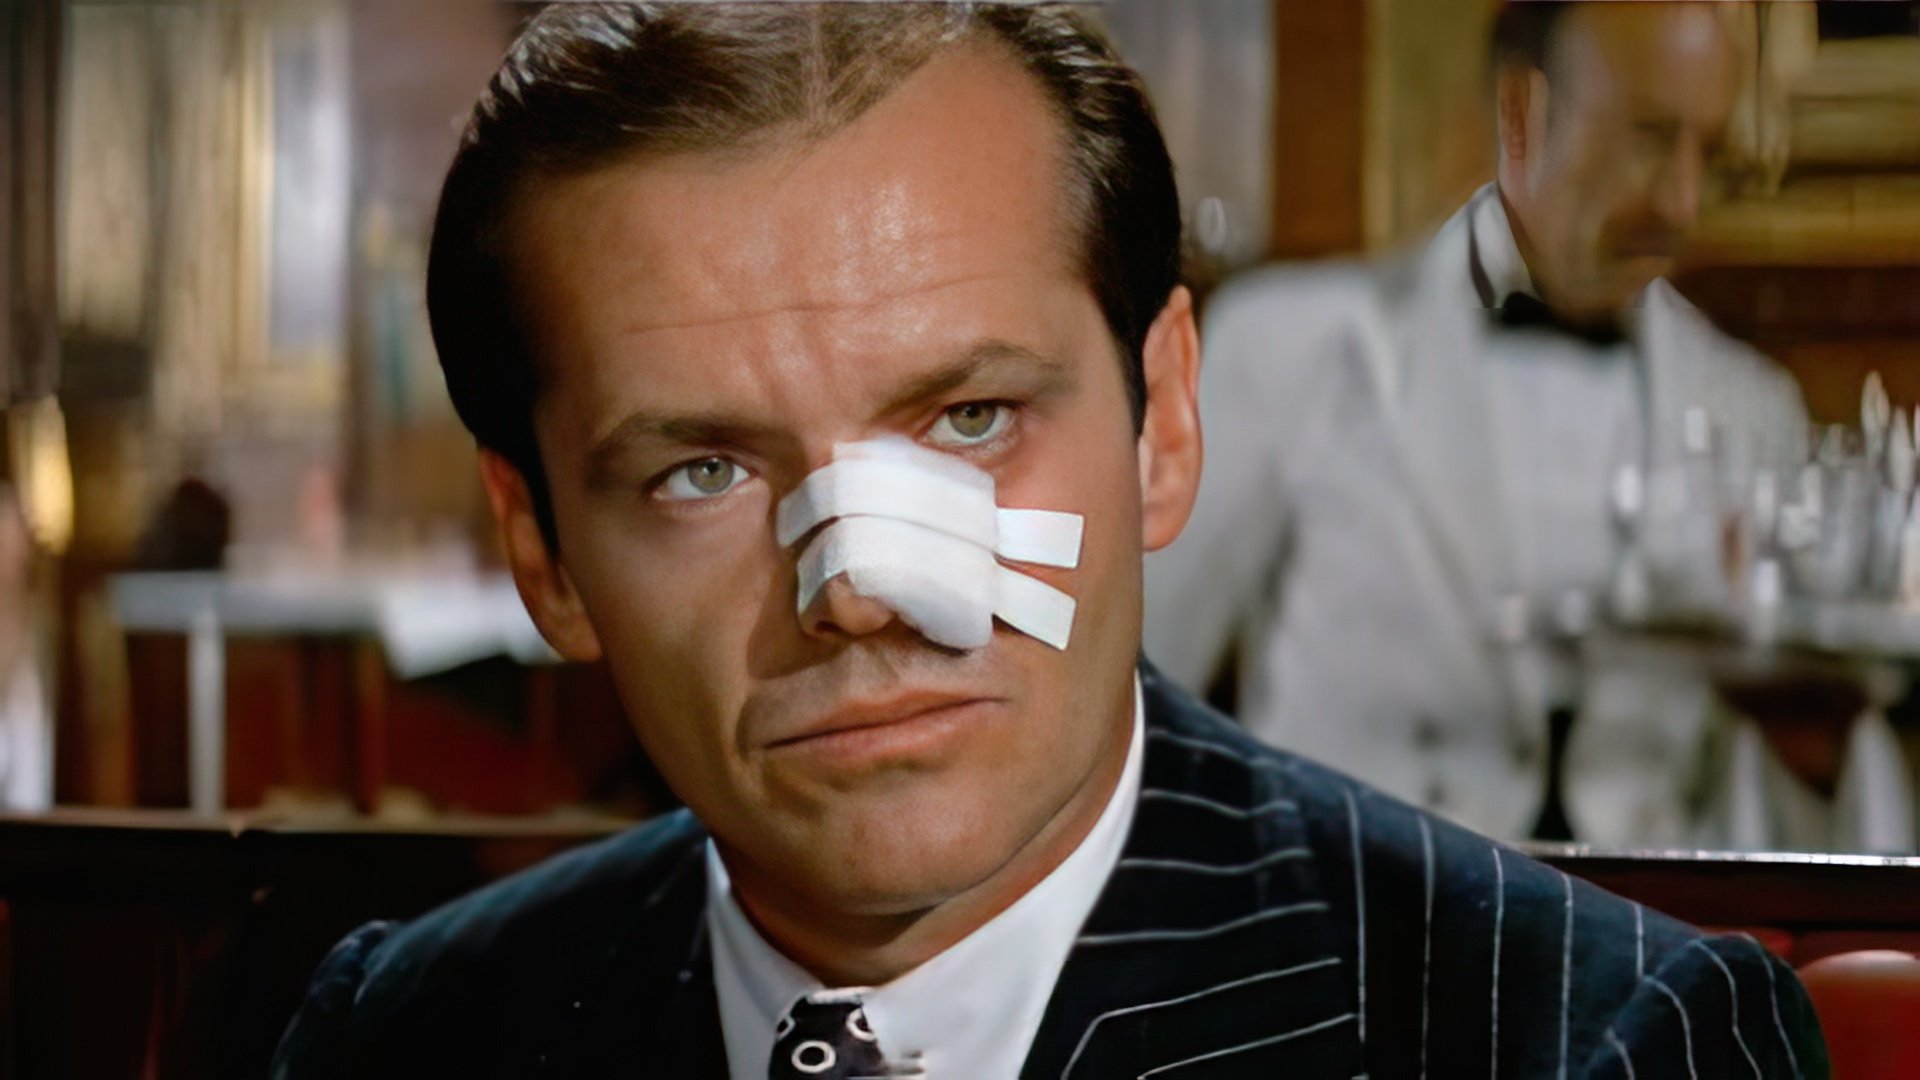 Young Jack Nicholson in 'Chinatown'